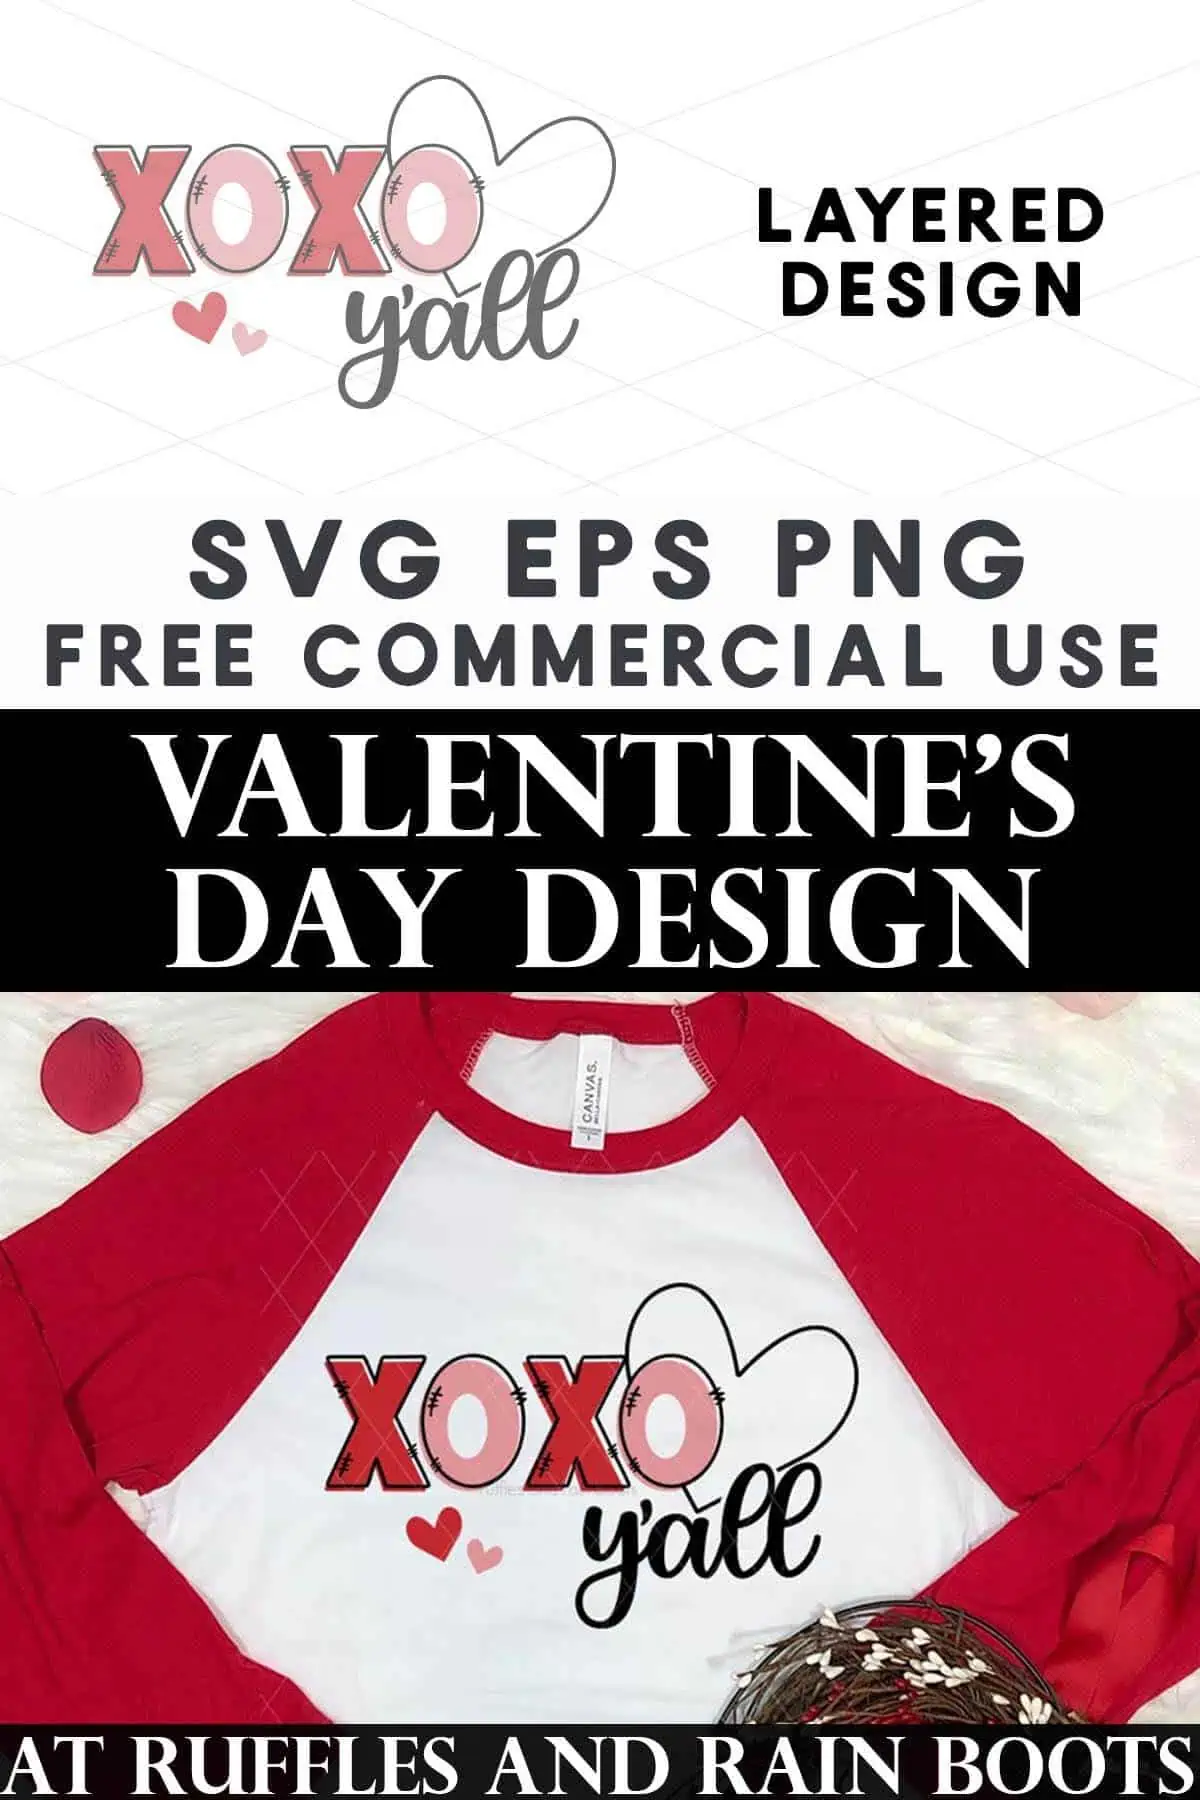 Split vertical image of red and white raglan t-shirt which reads XOXO y'all and text which reads Valentine's Day design for Texas and south.